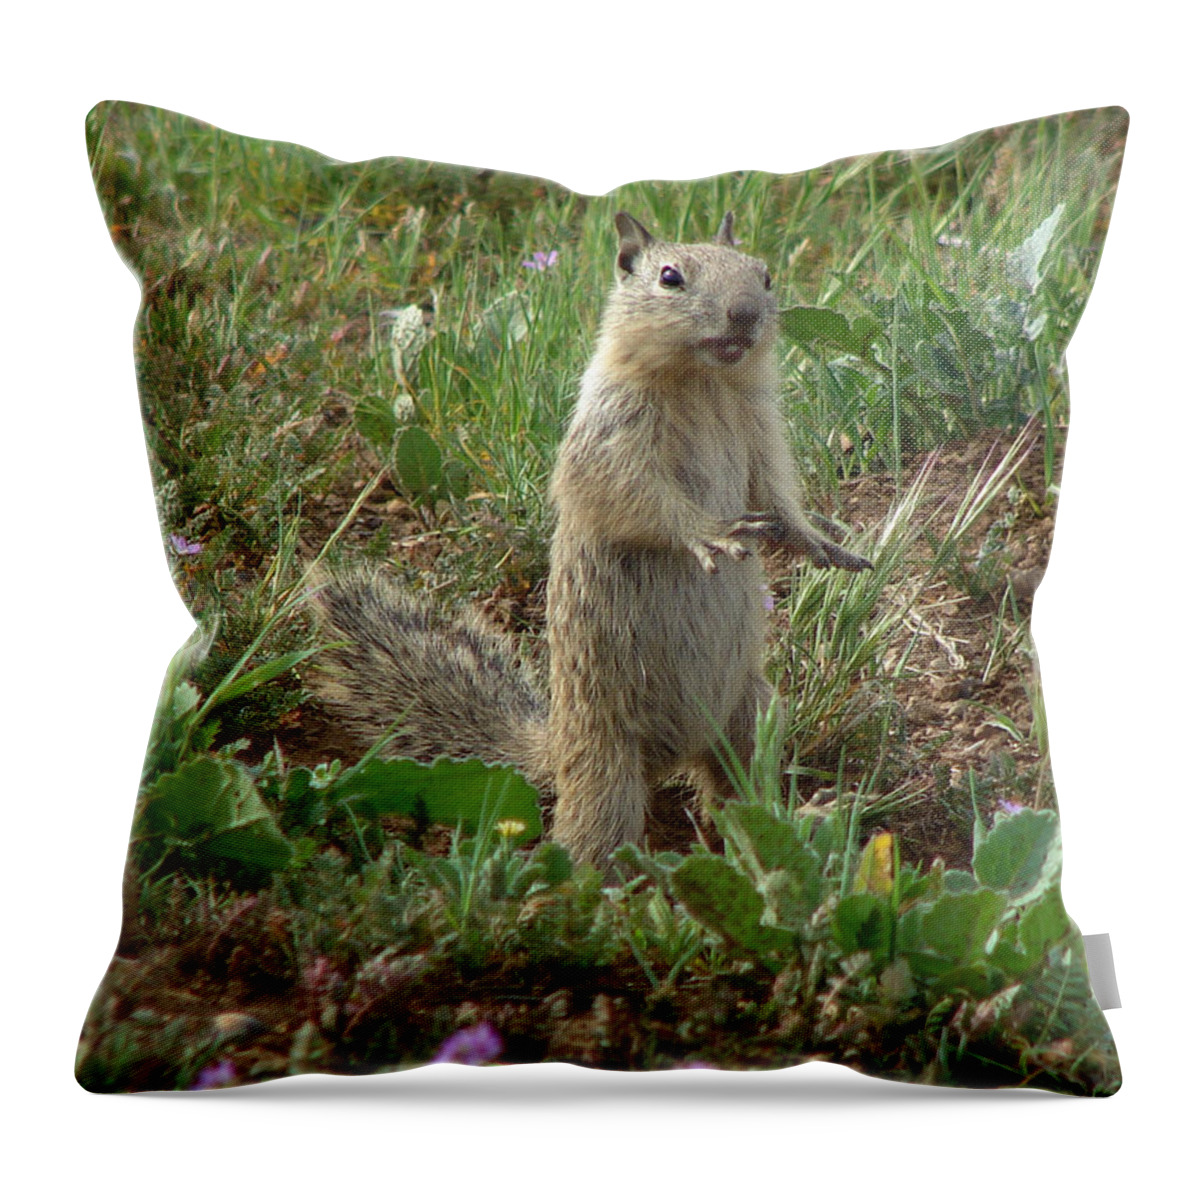 Wildlife Throw Pillow featuring the photograph Ground Squirrel by Carl Moore